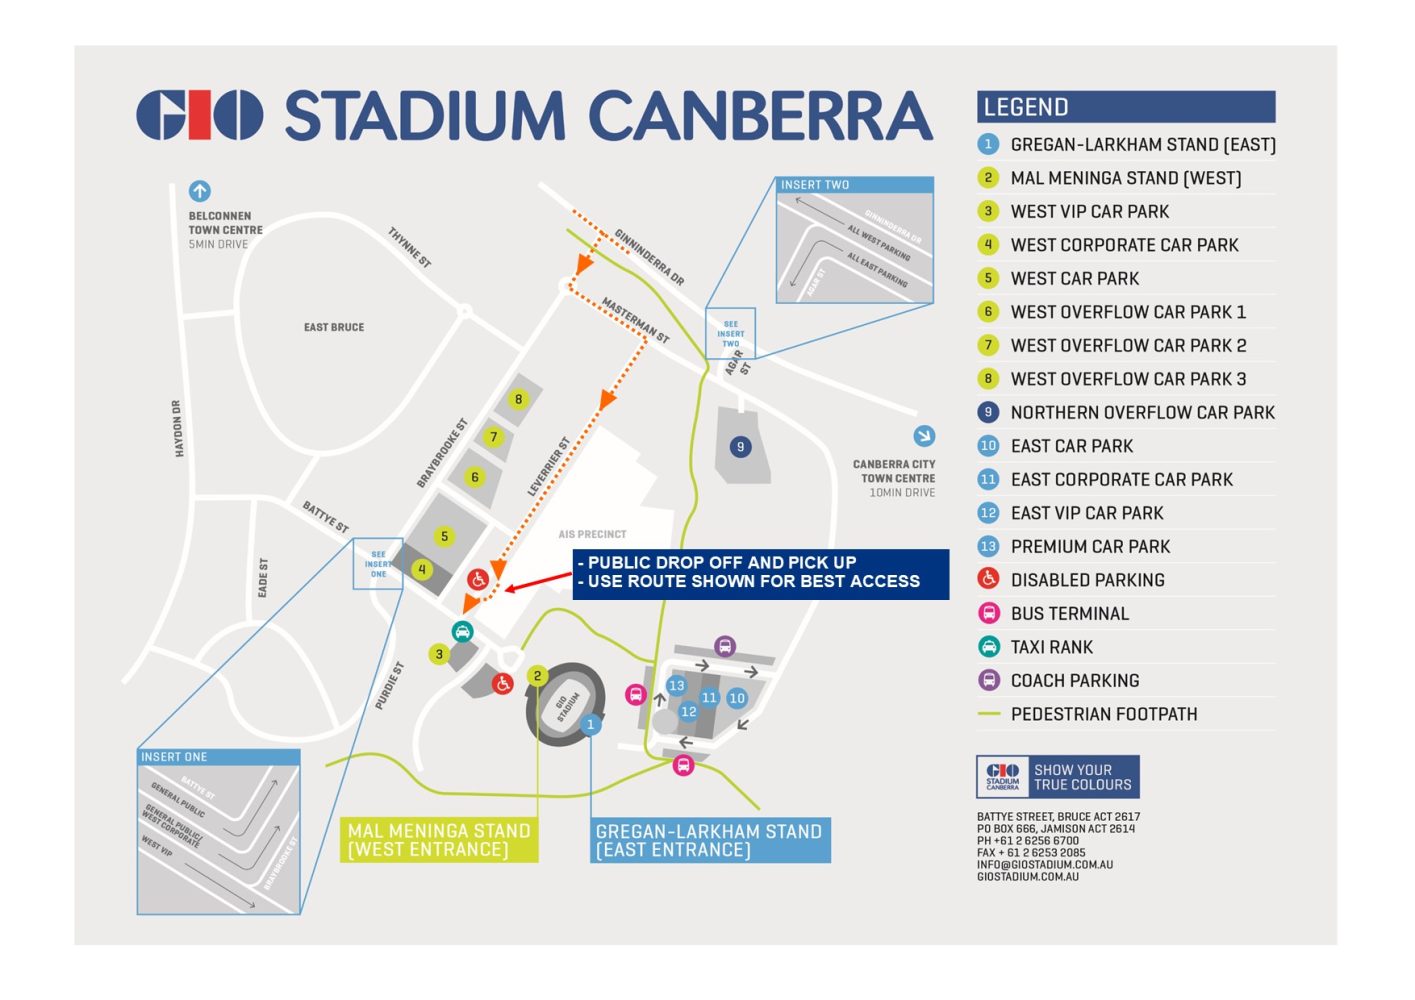 Car drop off zone on the western side of GIO Stadium